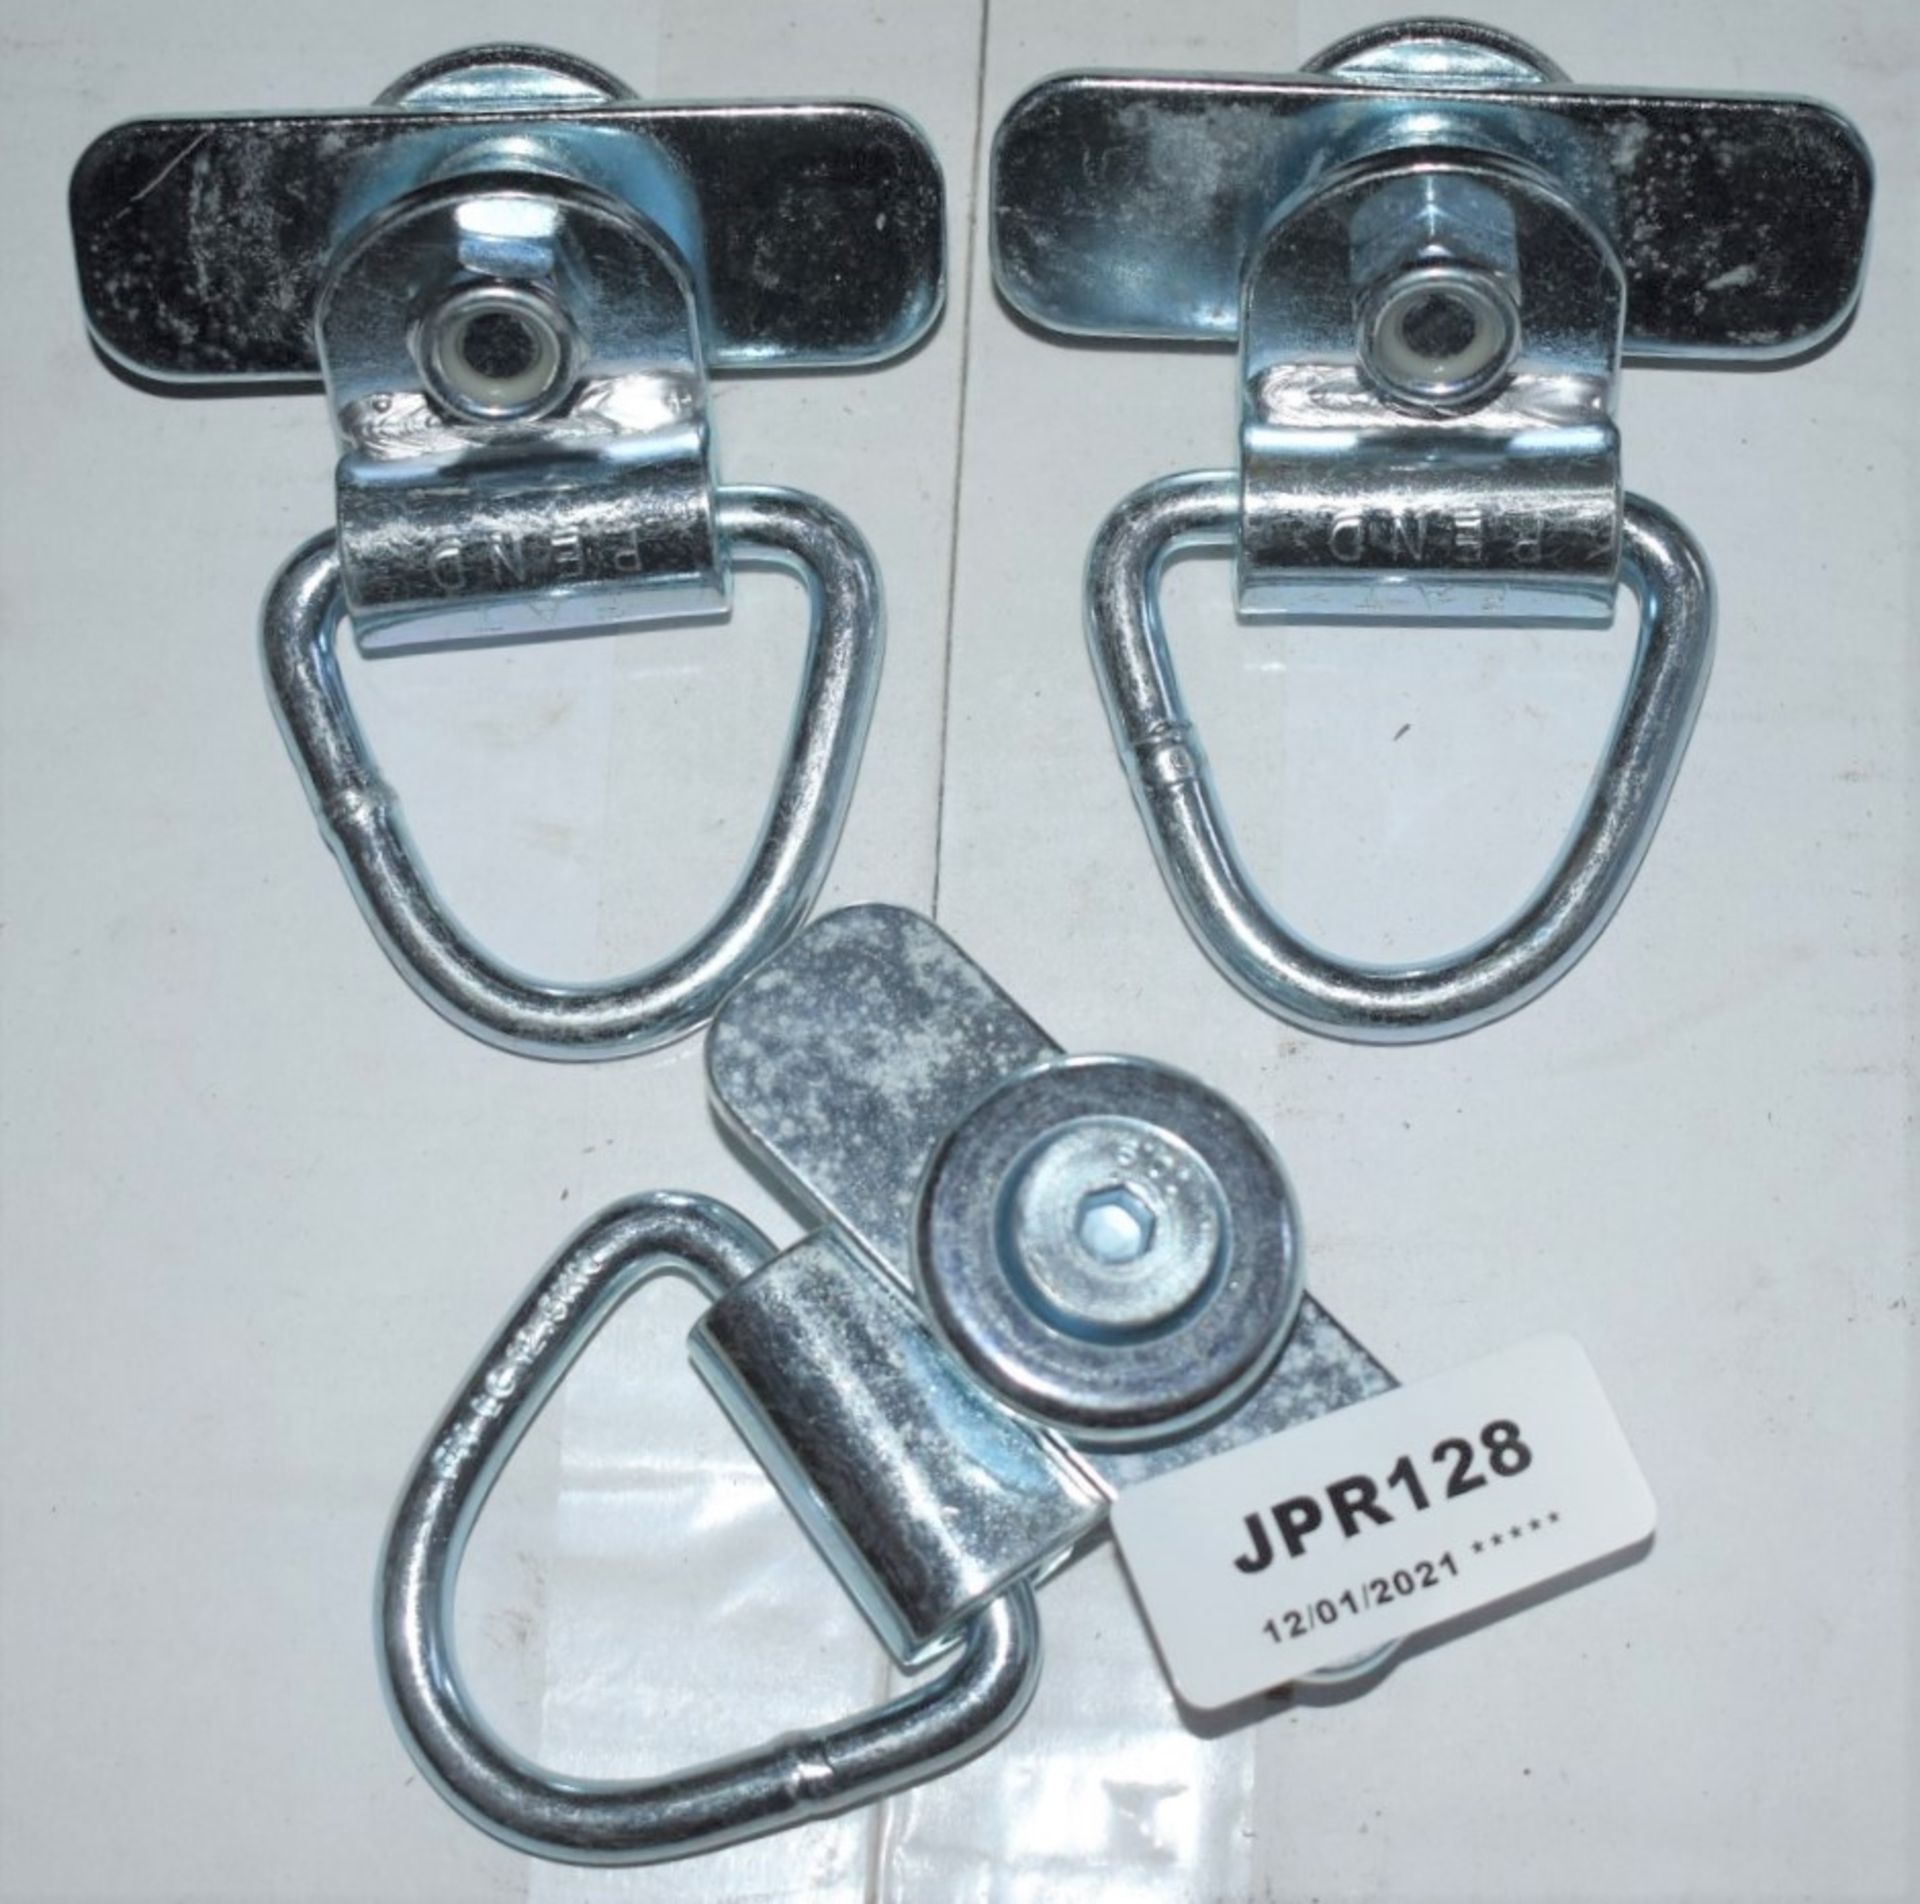 10 x Swivel D Ring Brackets For Truck Beds, Vans, Boats etc - Part No CS7 - New and Unused - CL622 -